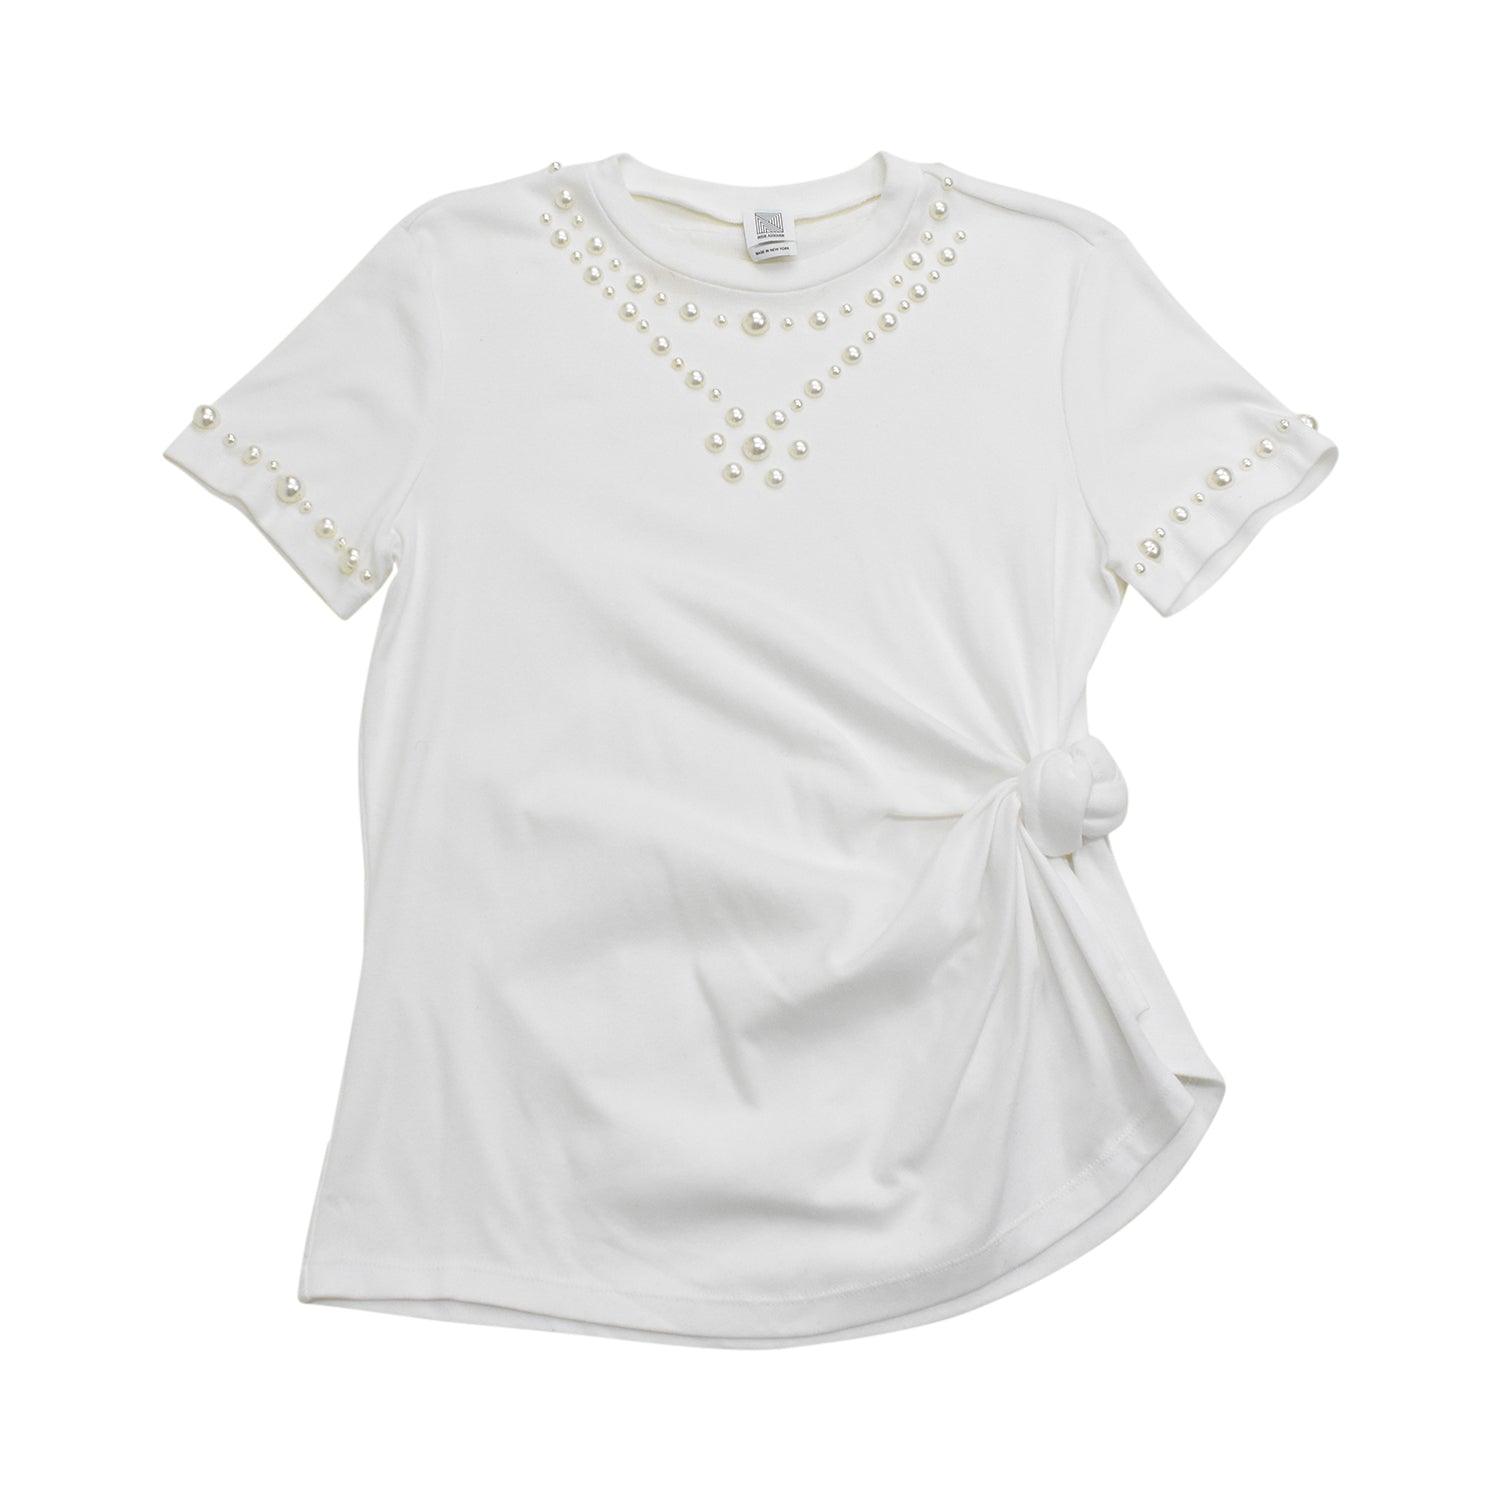 Rosie Assoulin Shirt - Women's L - Fashionably Yours